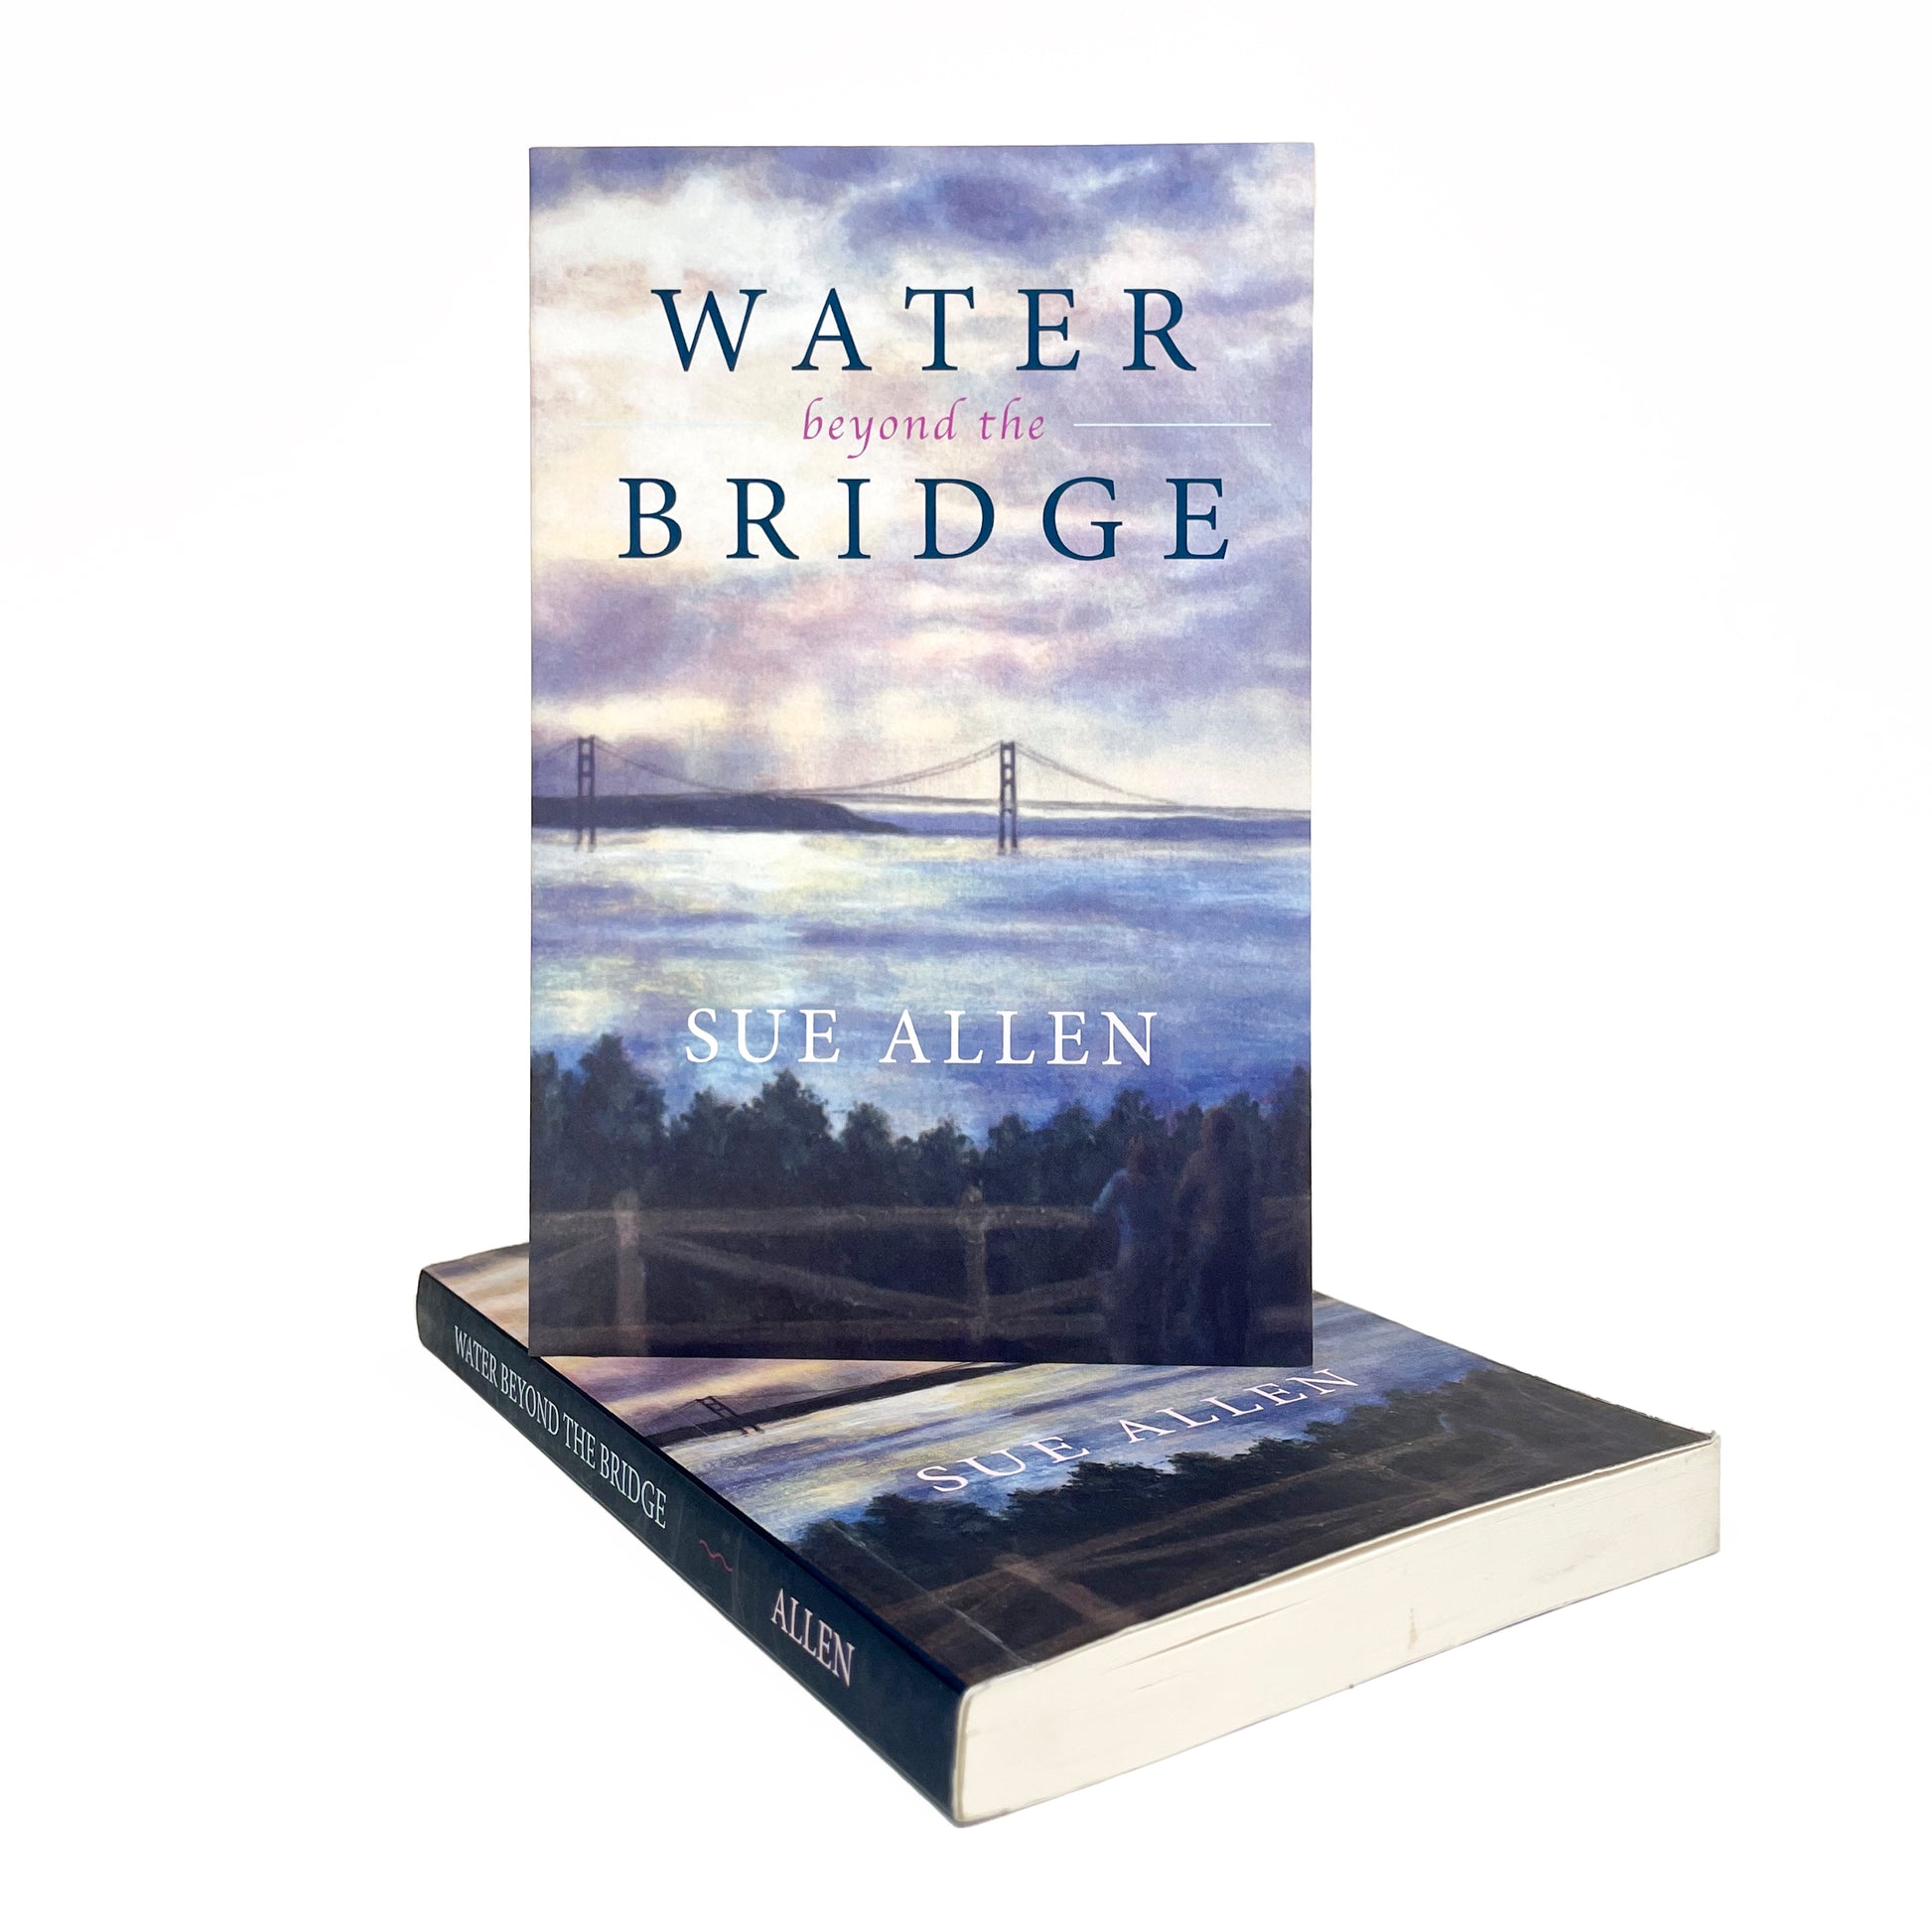 Water Beyond the Bridge by Sue Allen. A later in life love story about two Mackinac Island summer lovers from decades past.